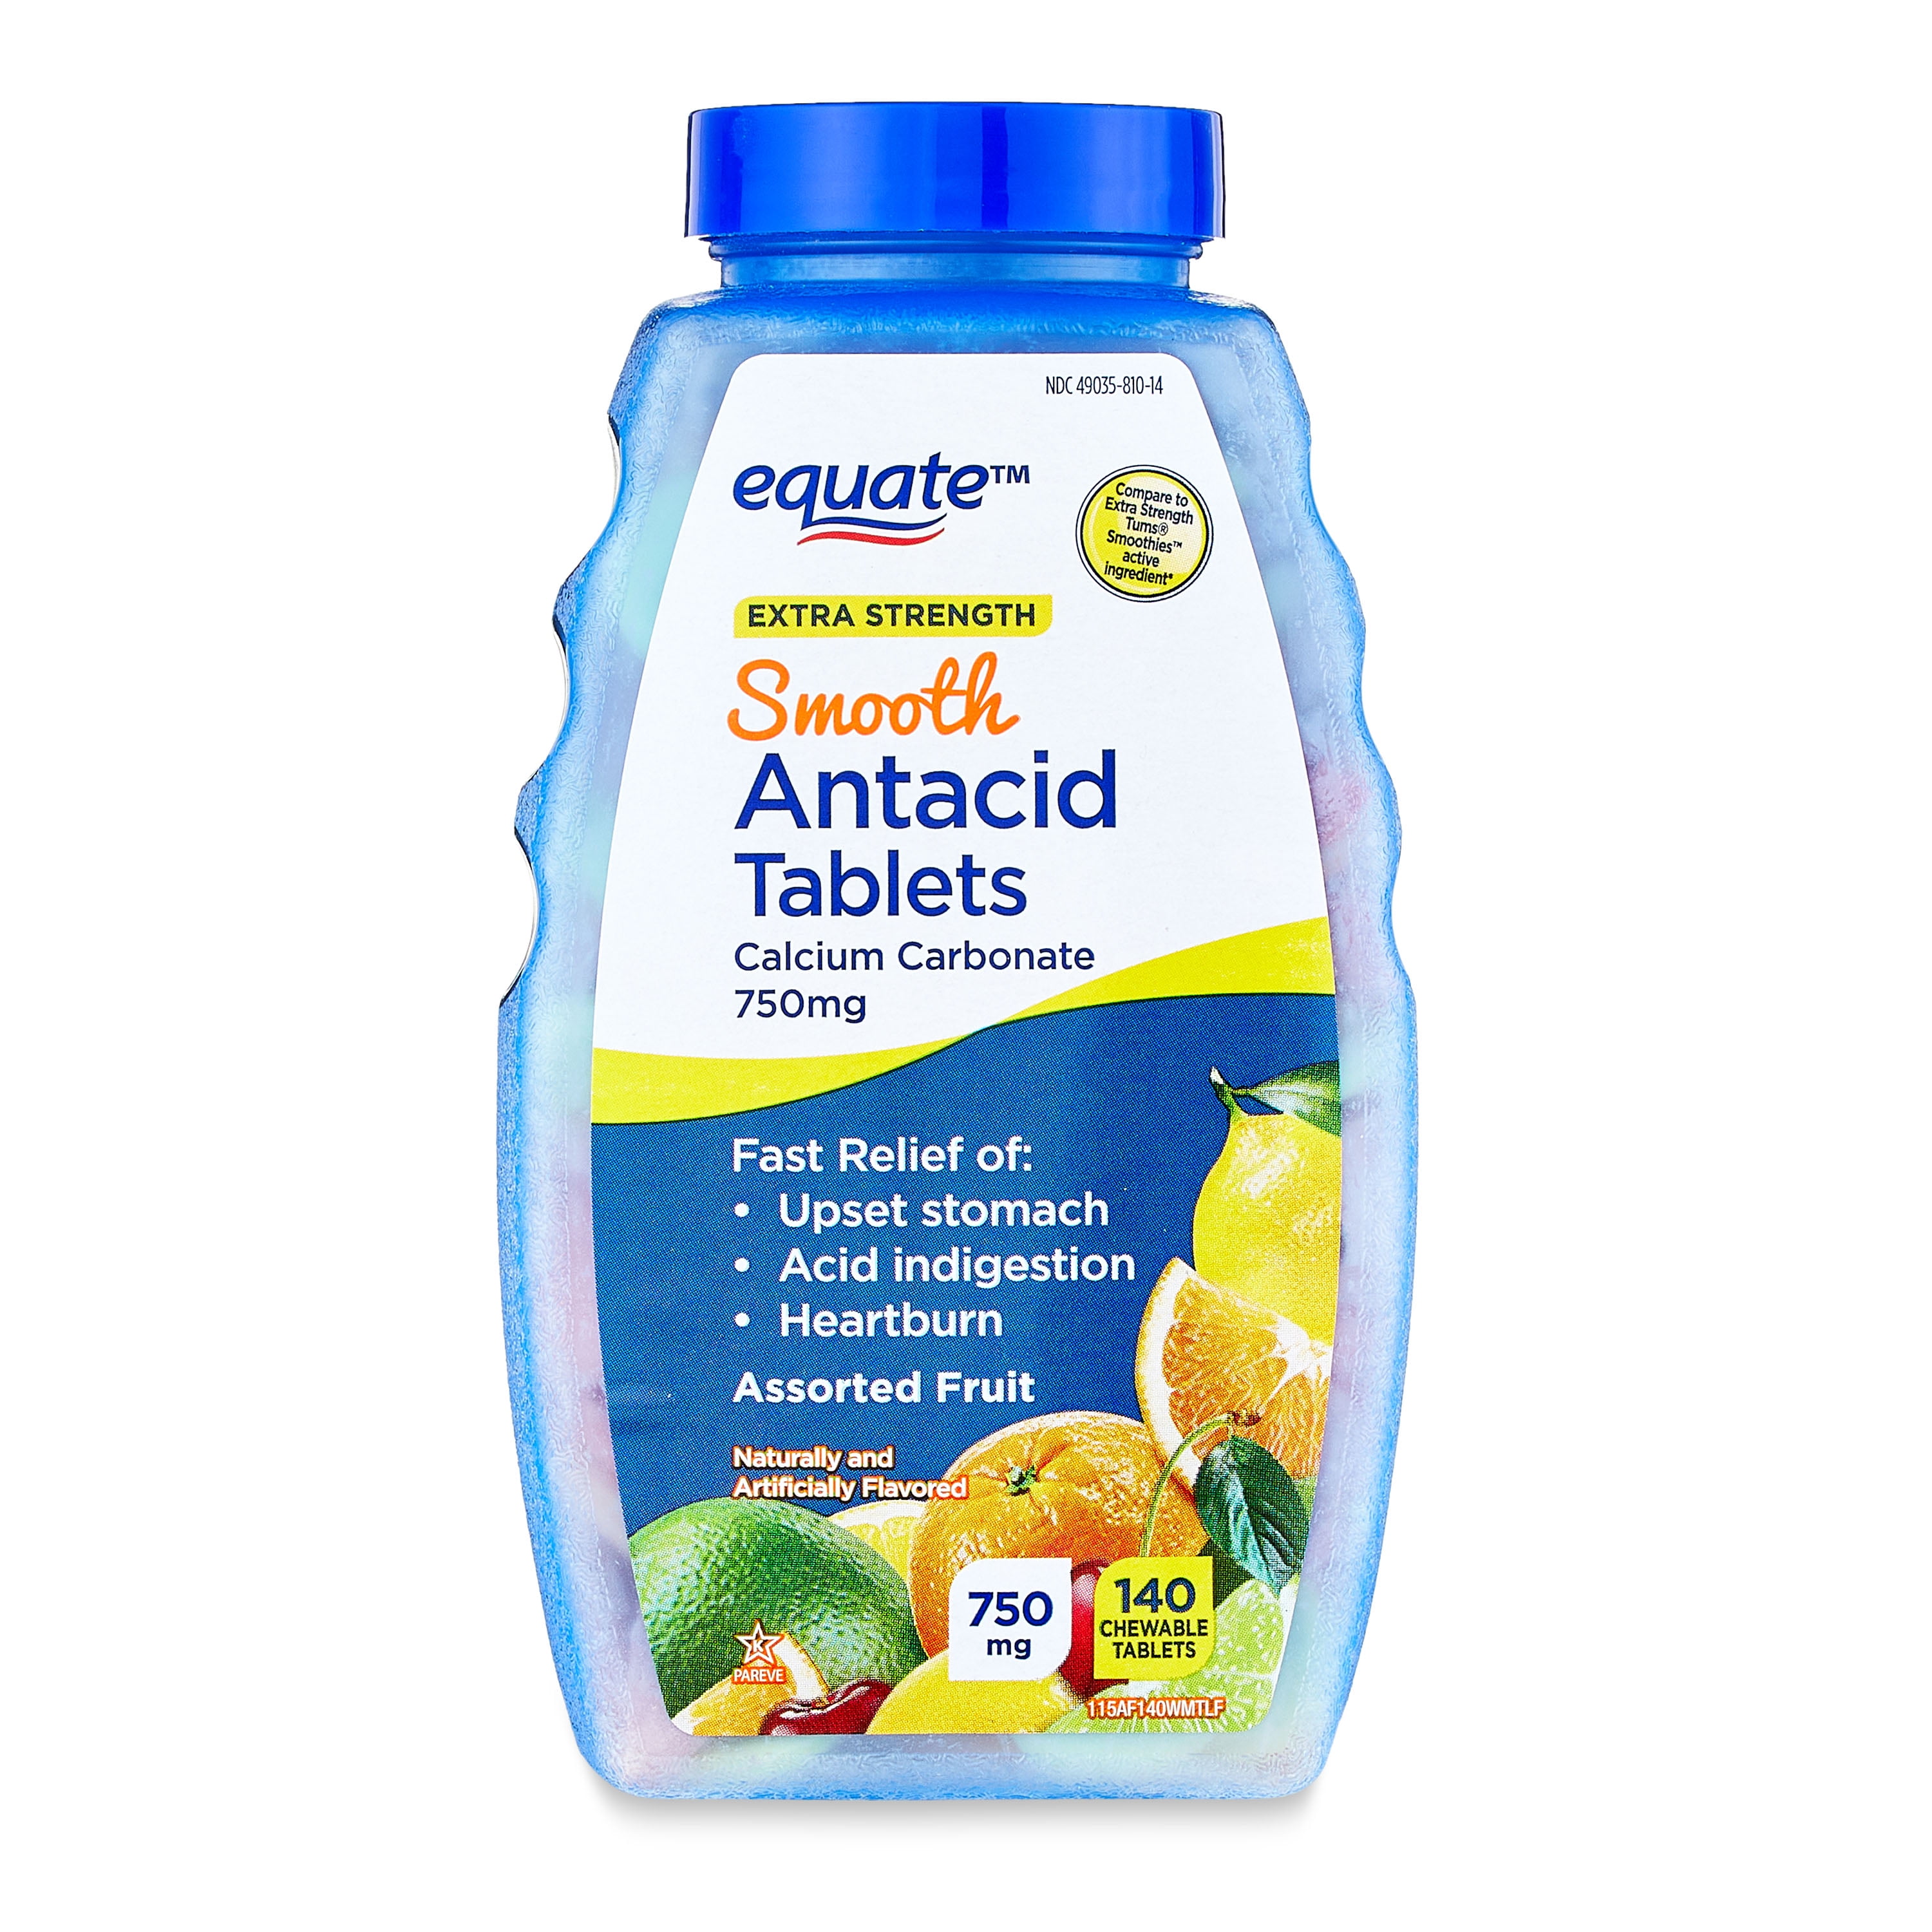 Equate Extra Strength Smooth Chews Antacid Tablets, Assorted Fruit, over the Counter, 140 Count